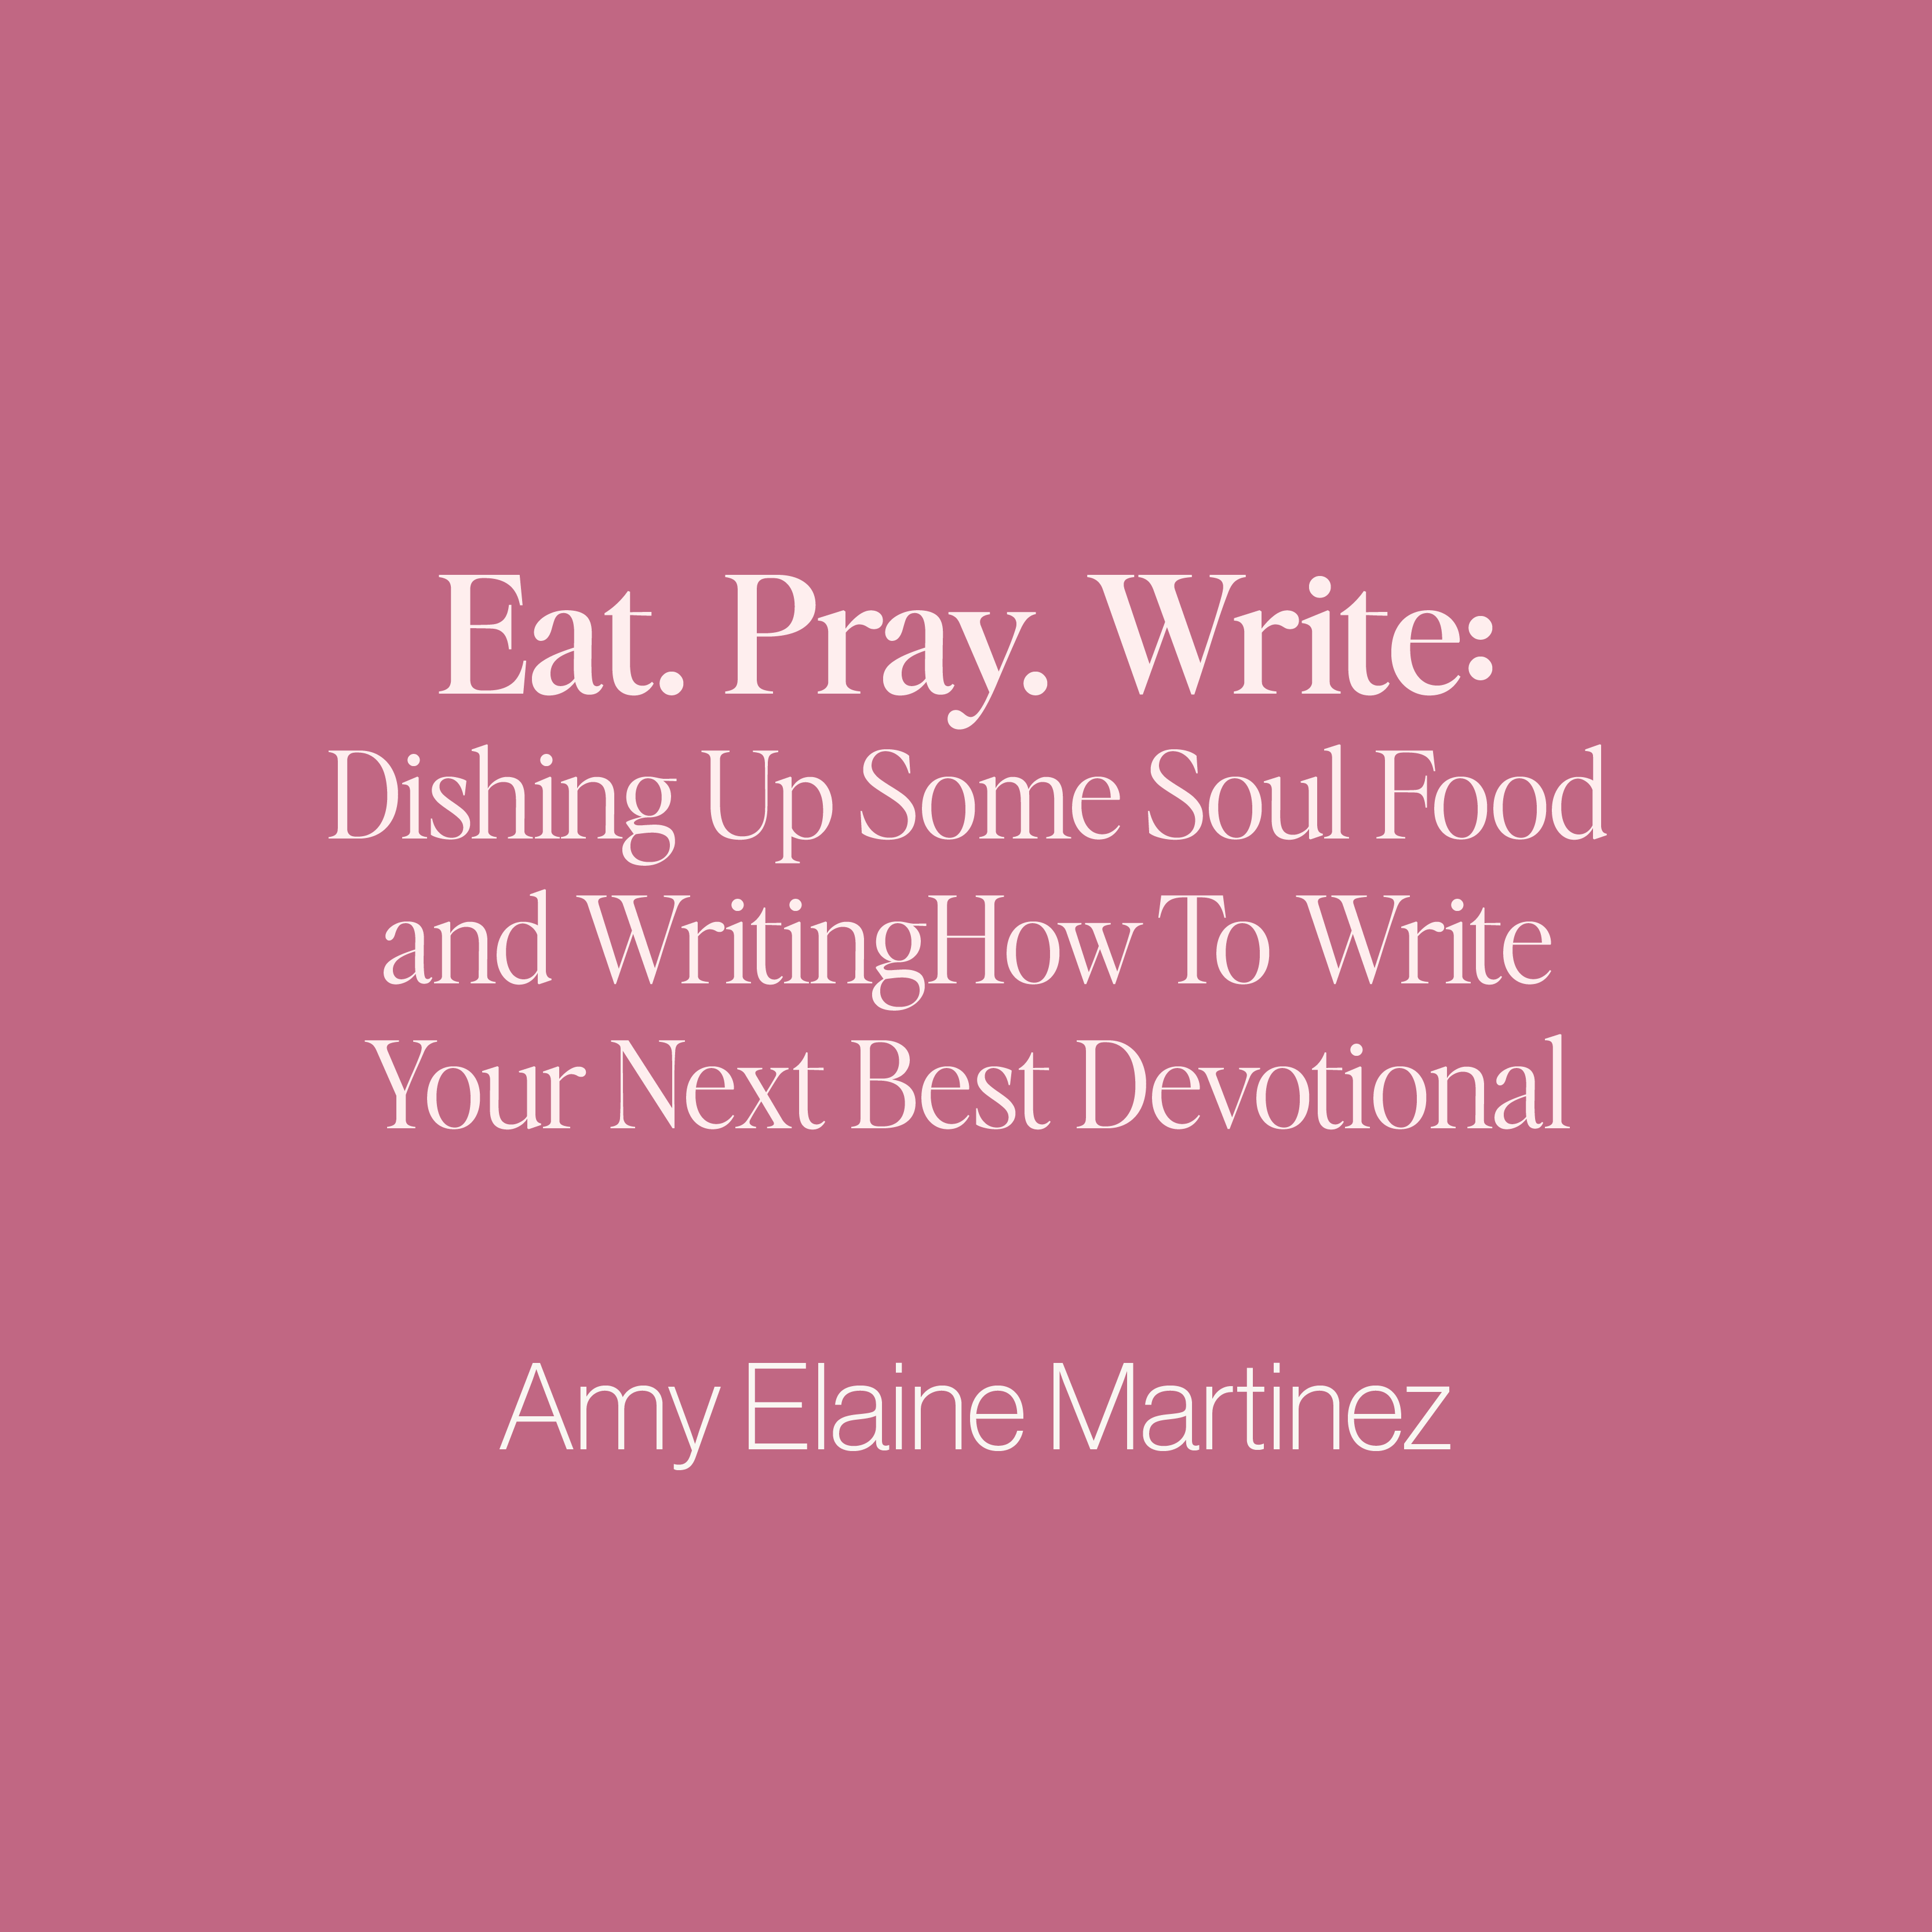 Eat. Pray. Write. Three words that will help you create a devotional with a hungry heart and draw your readers closer to God. Begin with the PRAY method, and watch how God works …